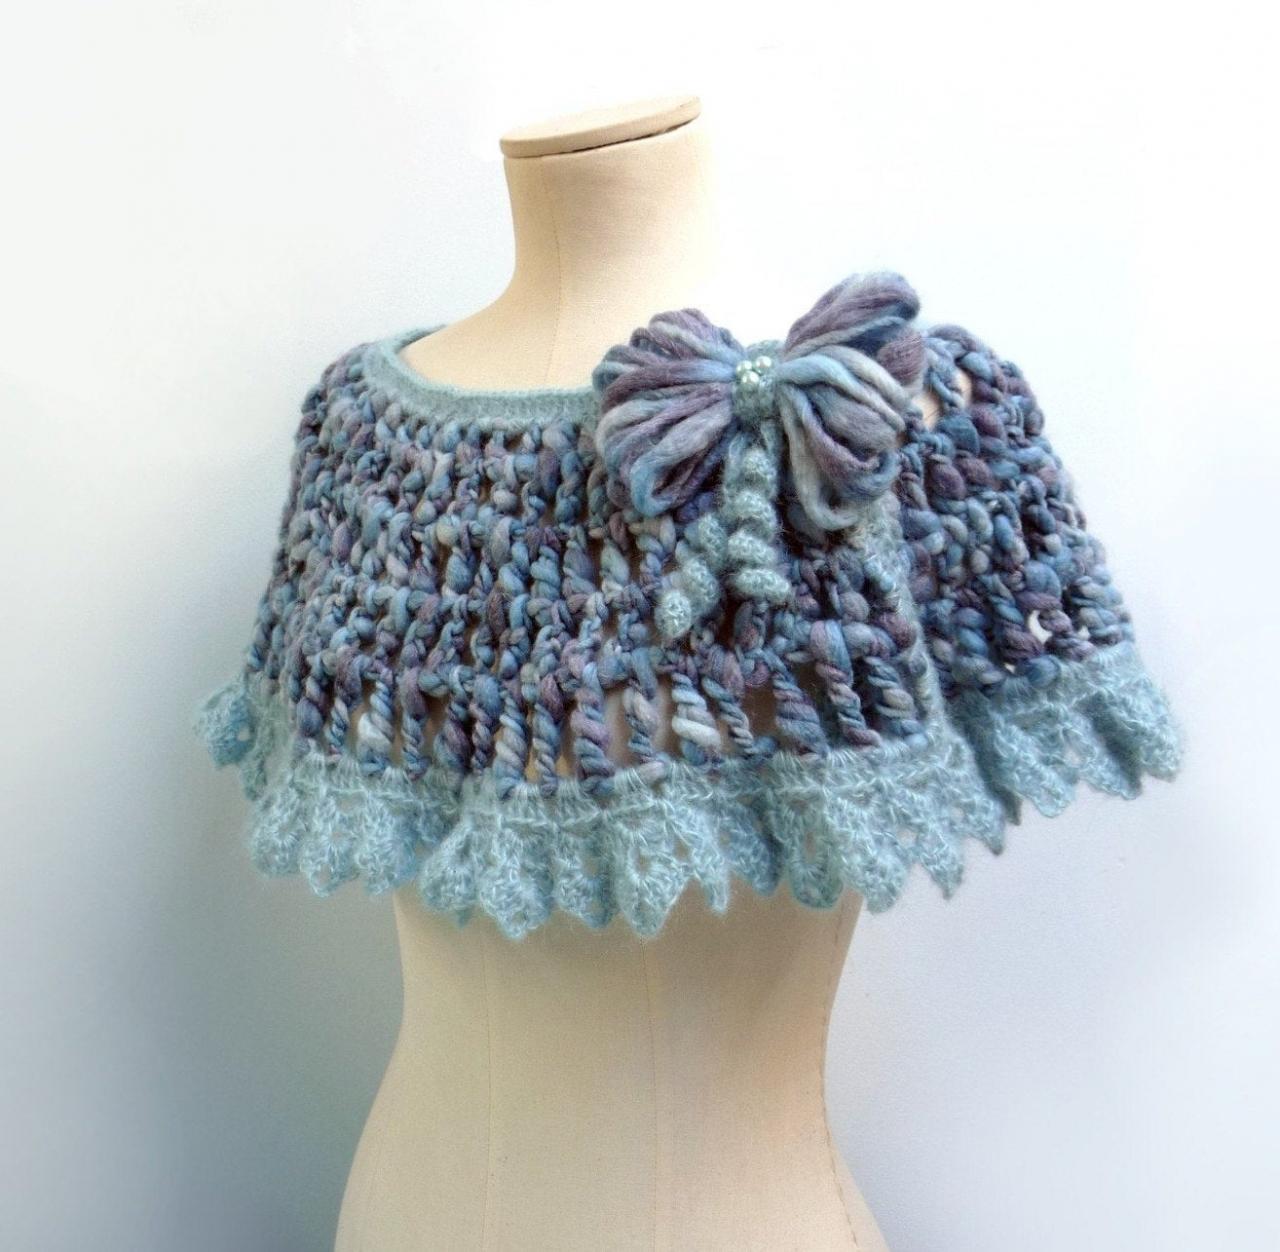 Crochet Capelet / Wrap / Scarf - Light Blue - Romantic Lace Shawl With Yarn Bow - Angel